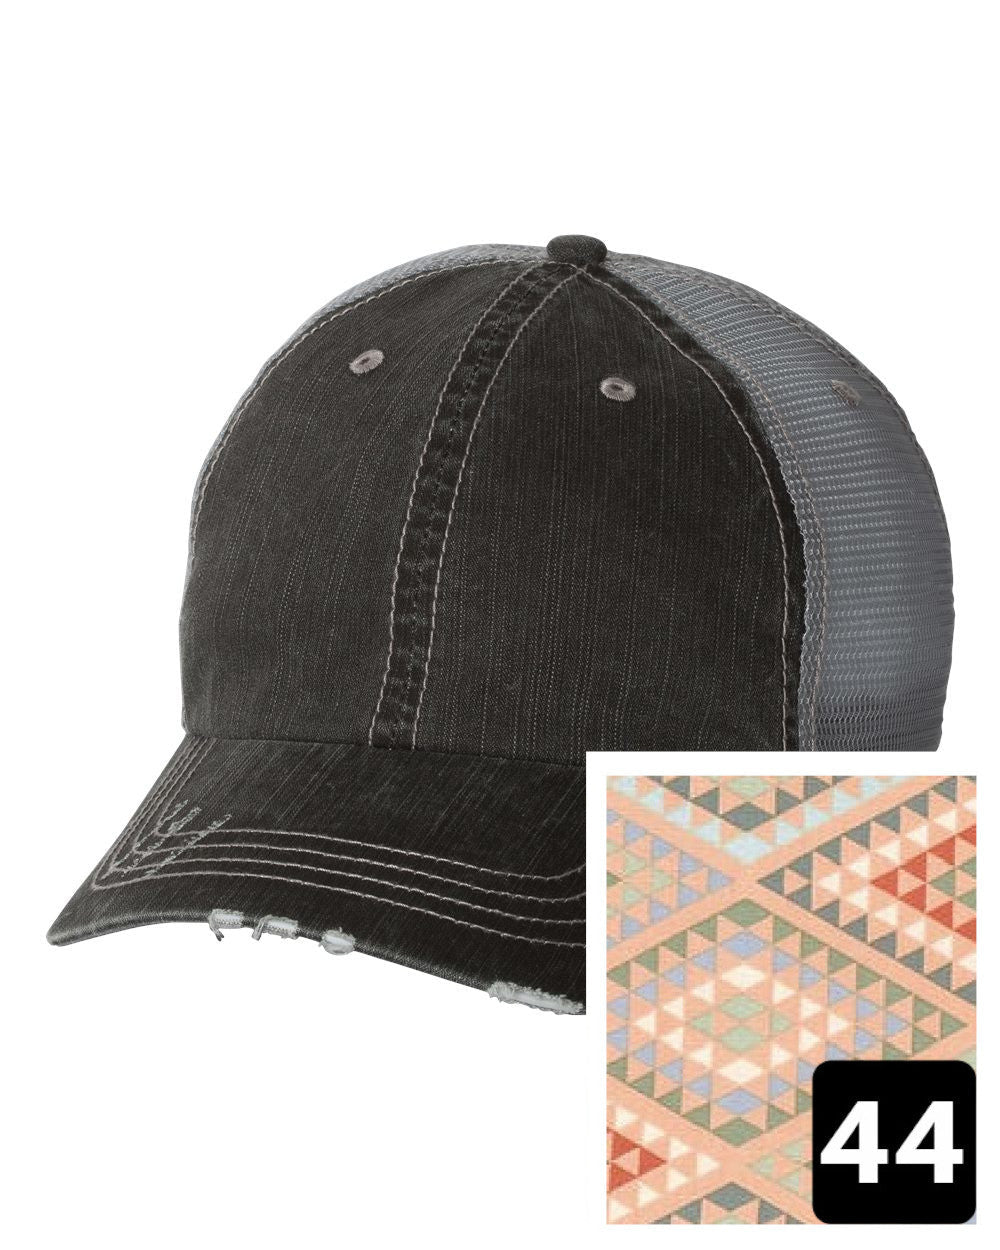 gray distressed trucker hat with navy coral and white chevron fabric state of New York